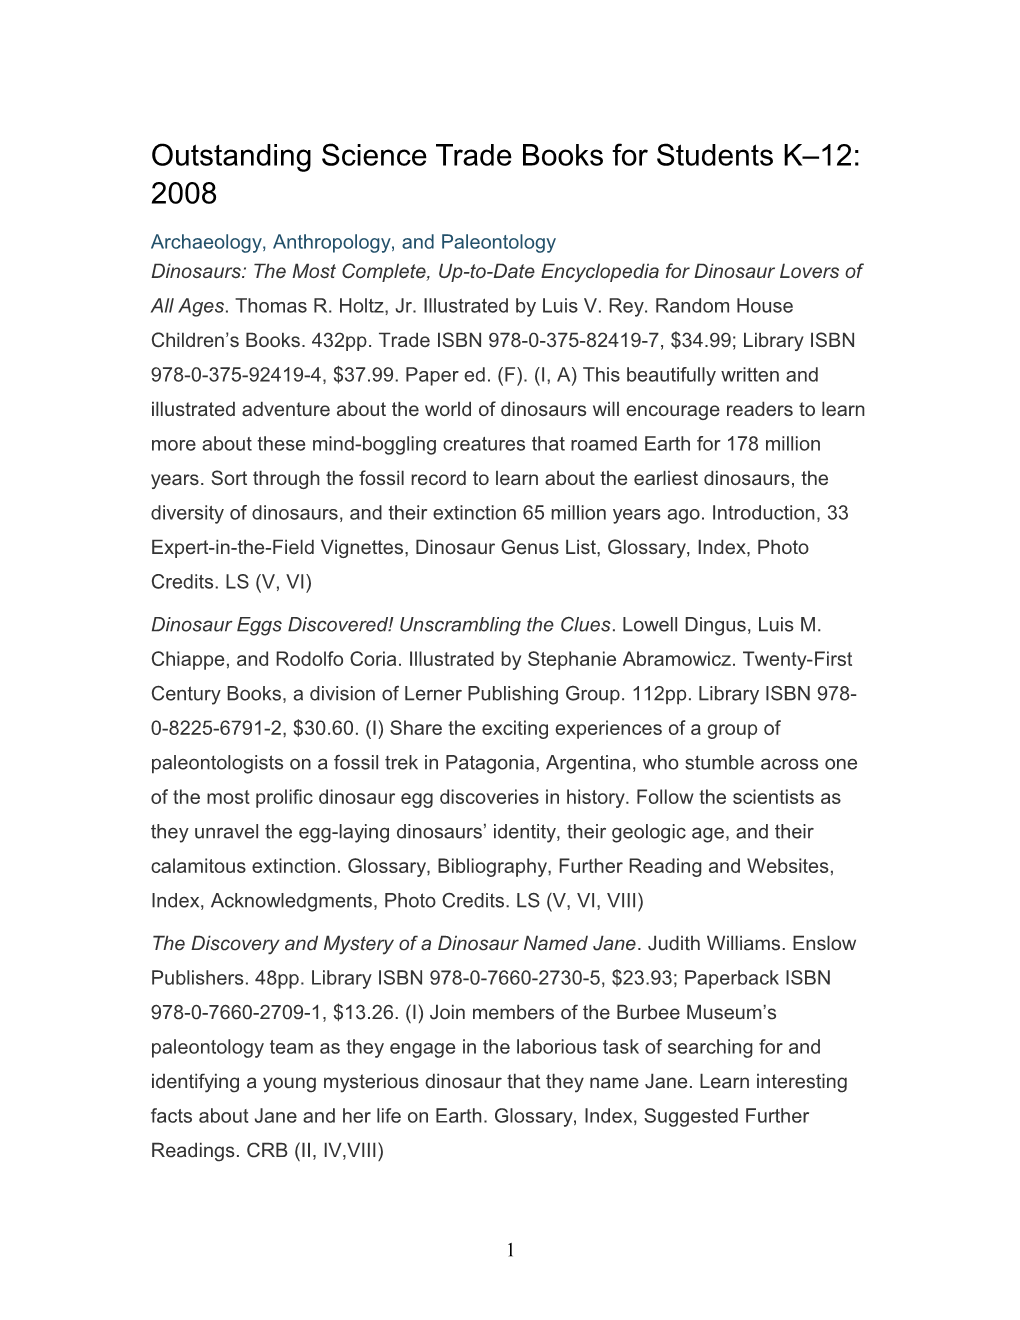 Outstanding Science Trade Books for Students K 12: 2008